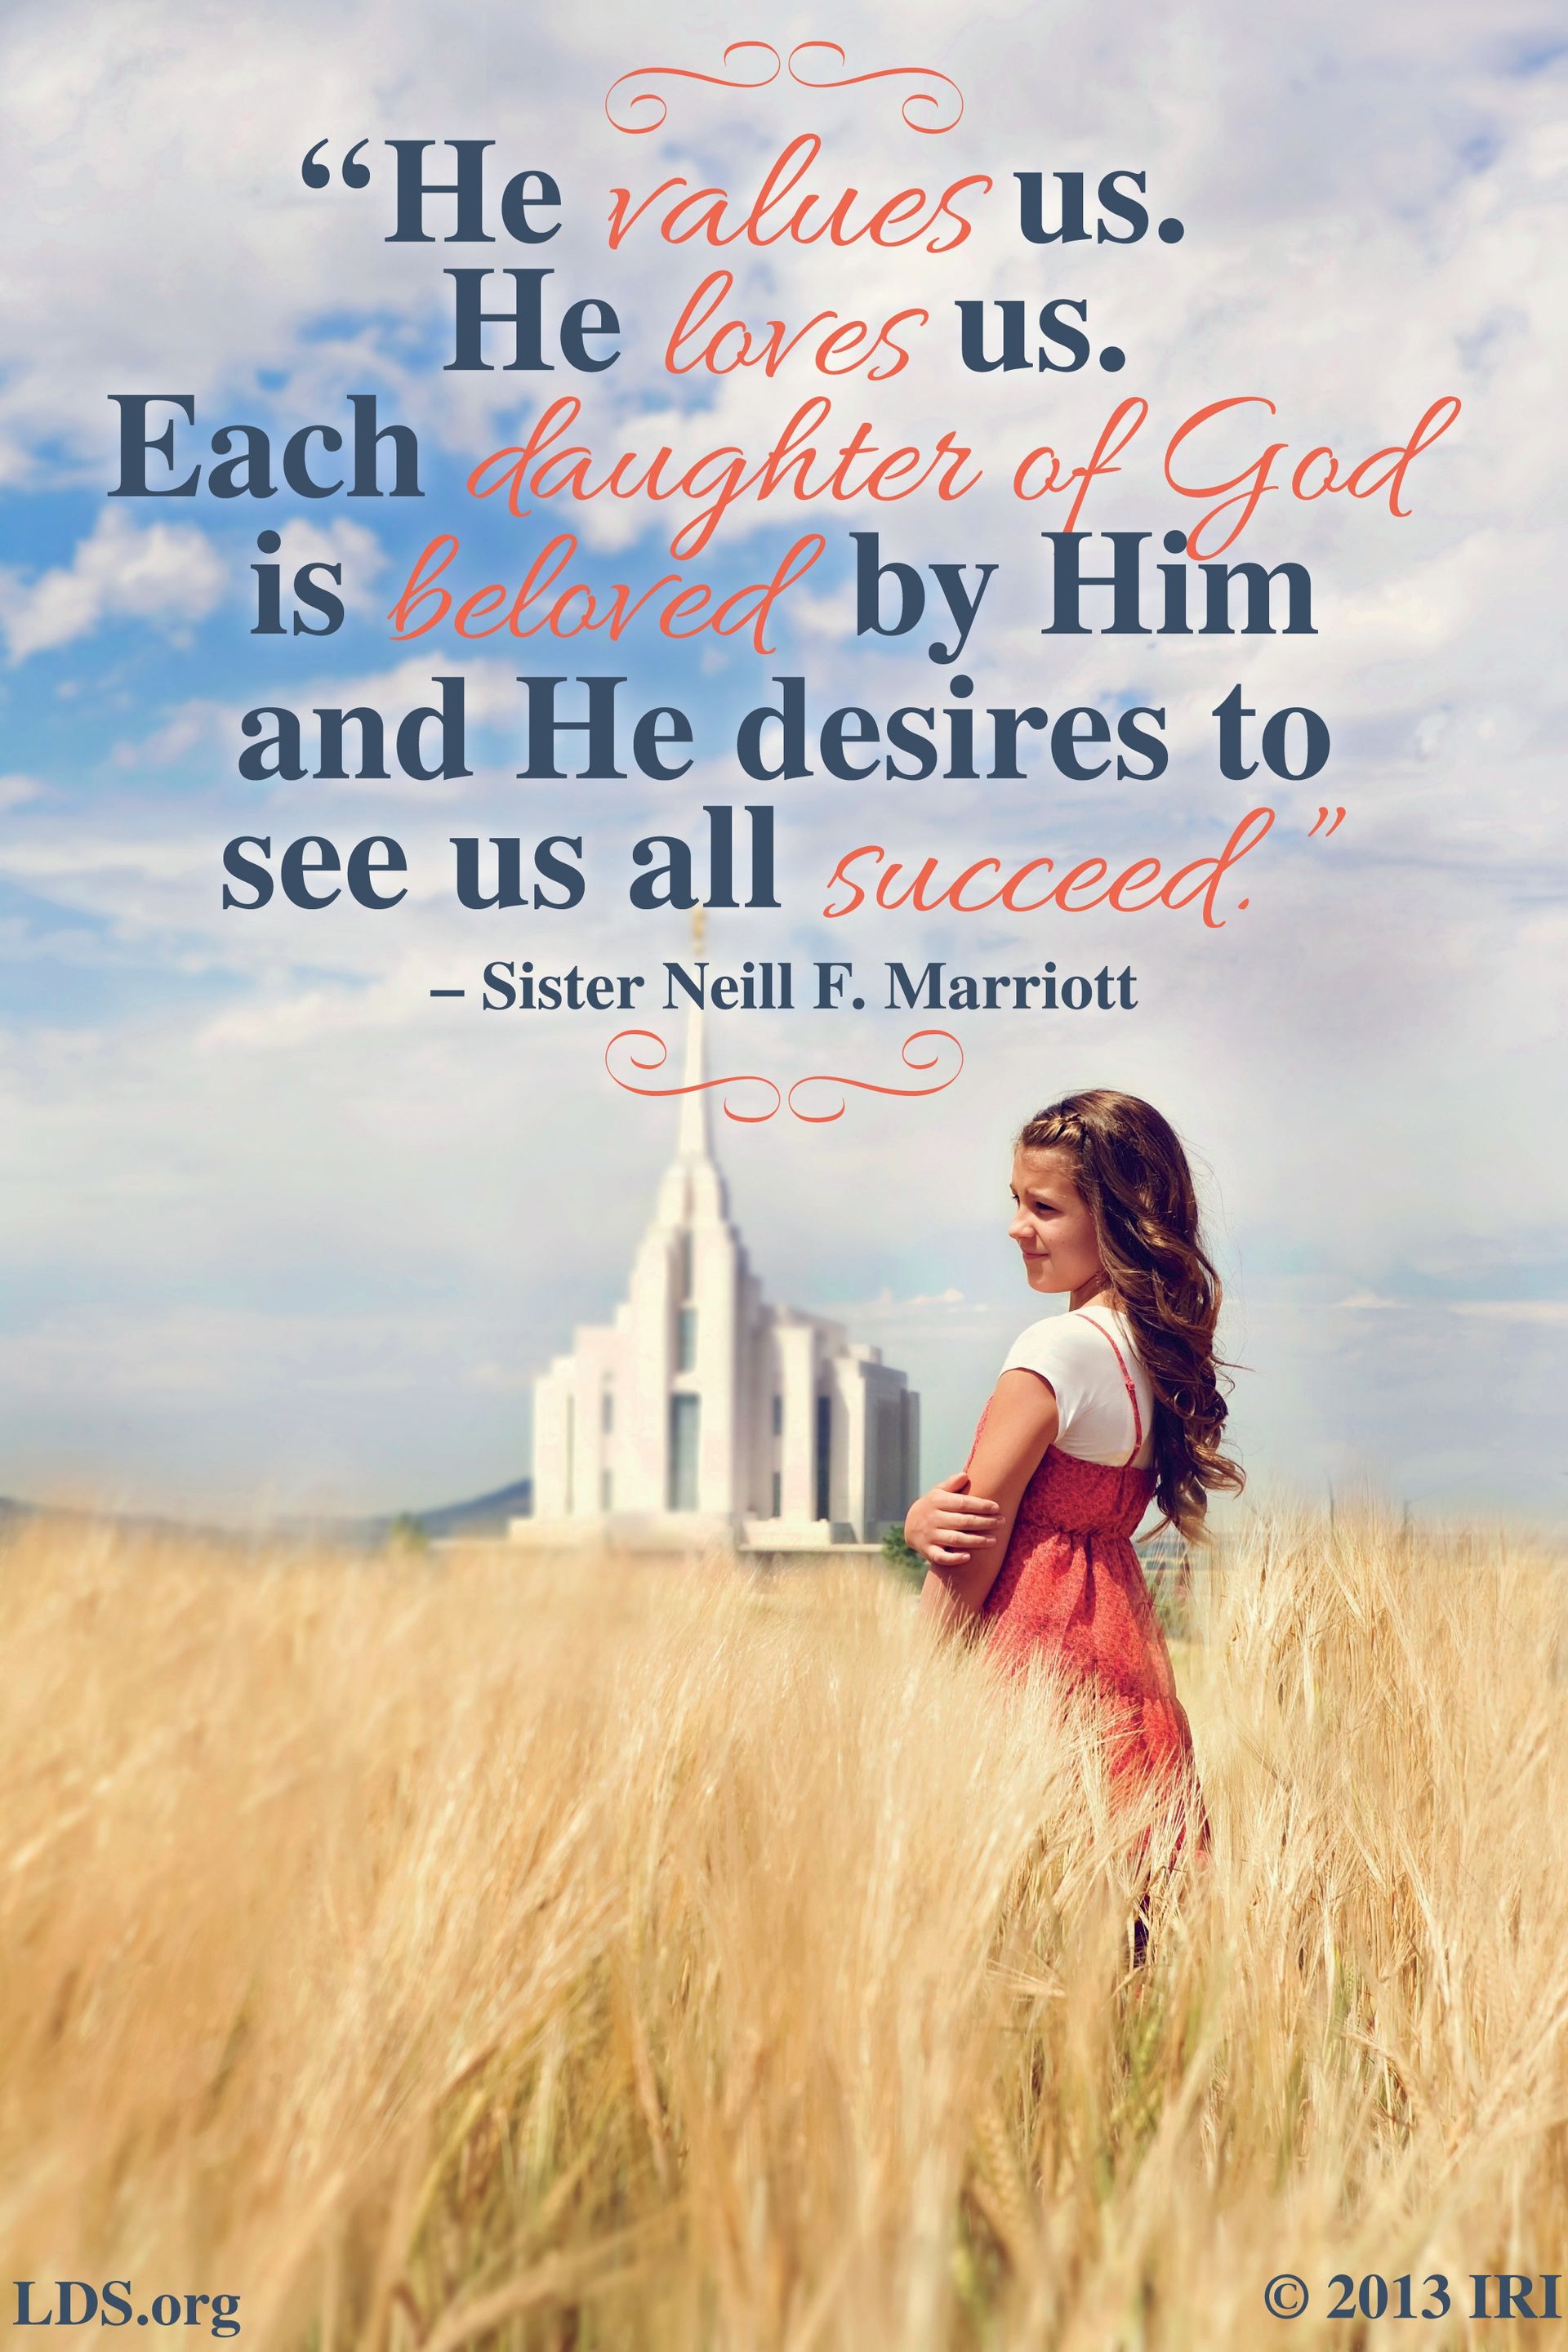 “He values us. He loves us. Each daughter of God is beloved by Him and He desires to see us all succeed.”—Sister Neill F. Marriott, “‘Elect’ Young Women Important to Work of Salvation” © undefined ipCode 1.